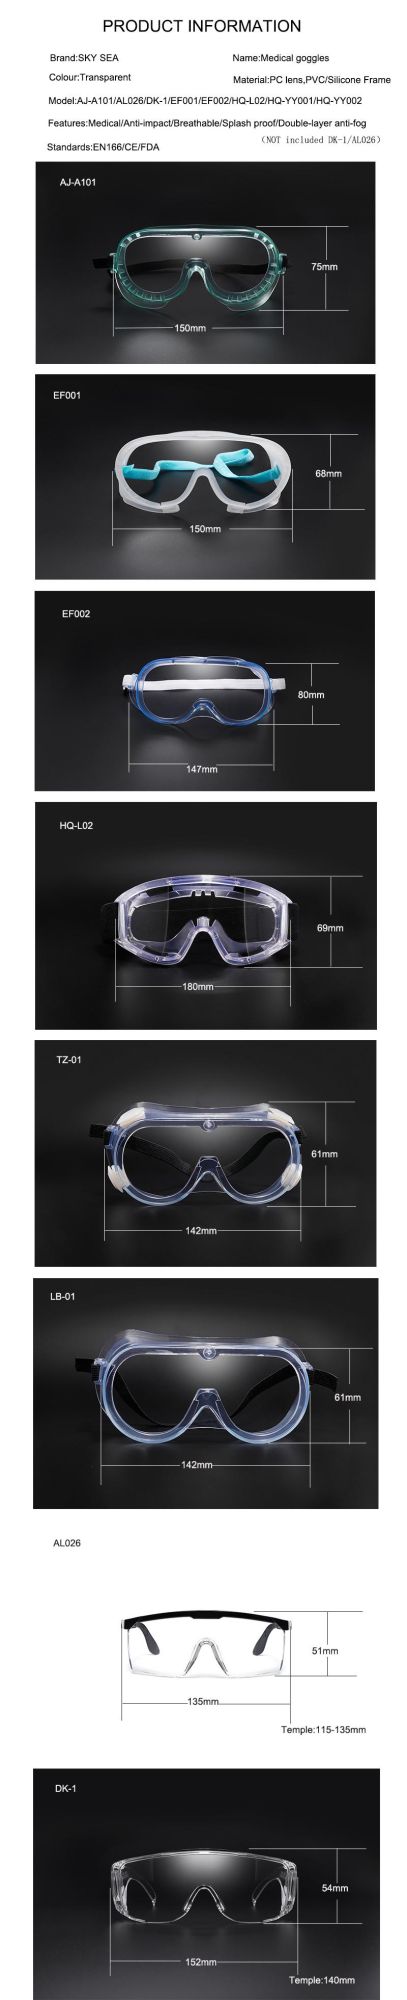 Medical Level Goggles, Double Anti Fog Safety Glasses, Protective Safety Glasses